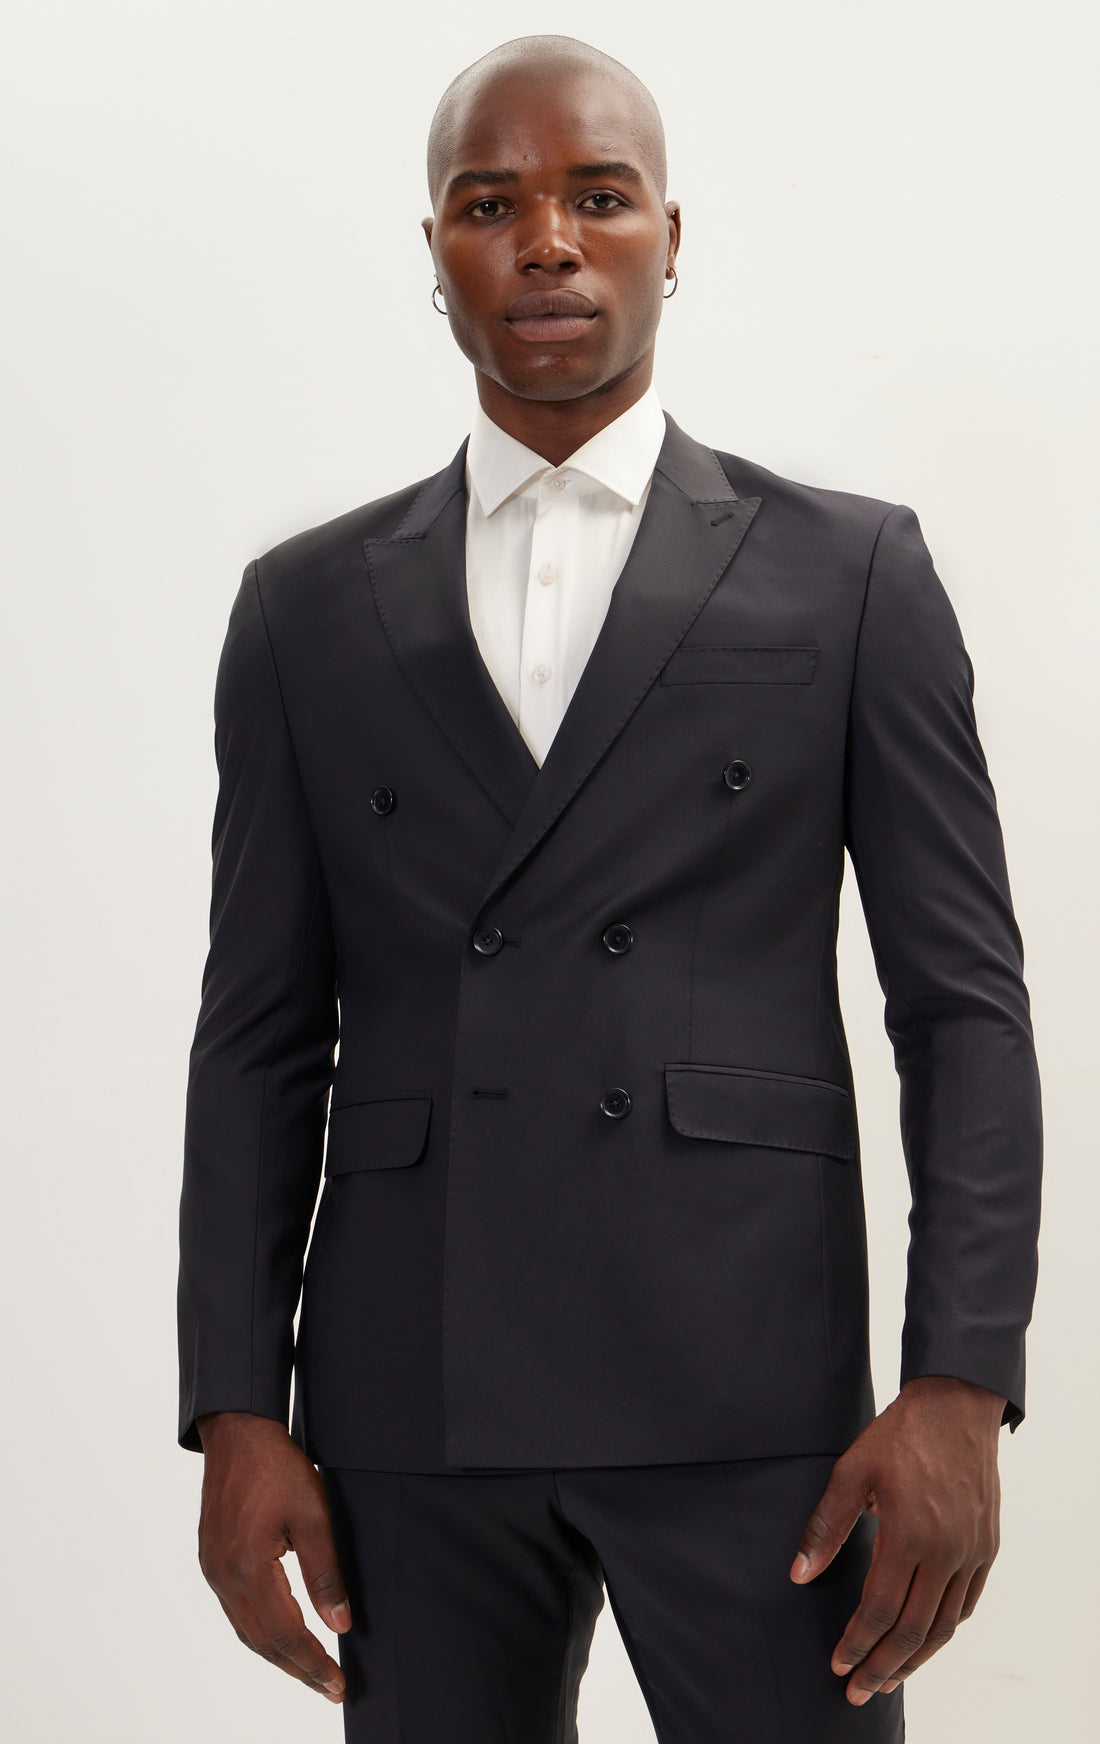 N° R206 SUPER 120S MERINO WOOL DOUBLE BREASTED SUIT - CARBON BLACK